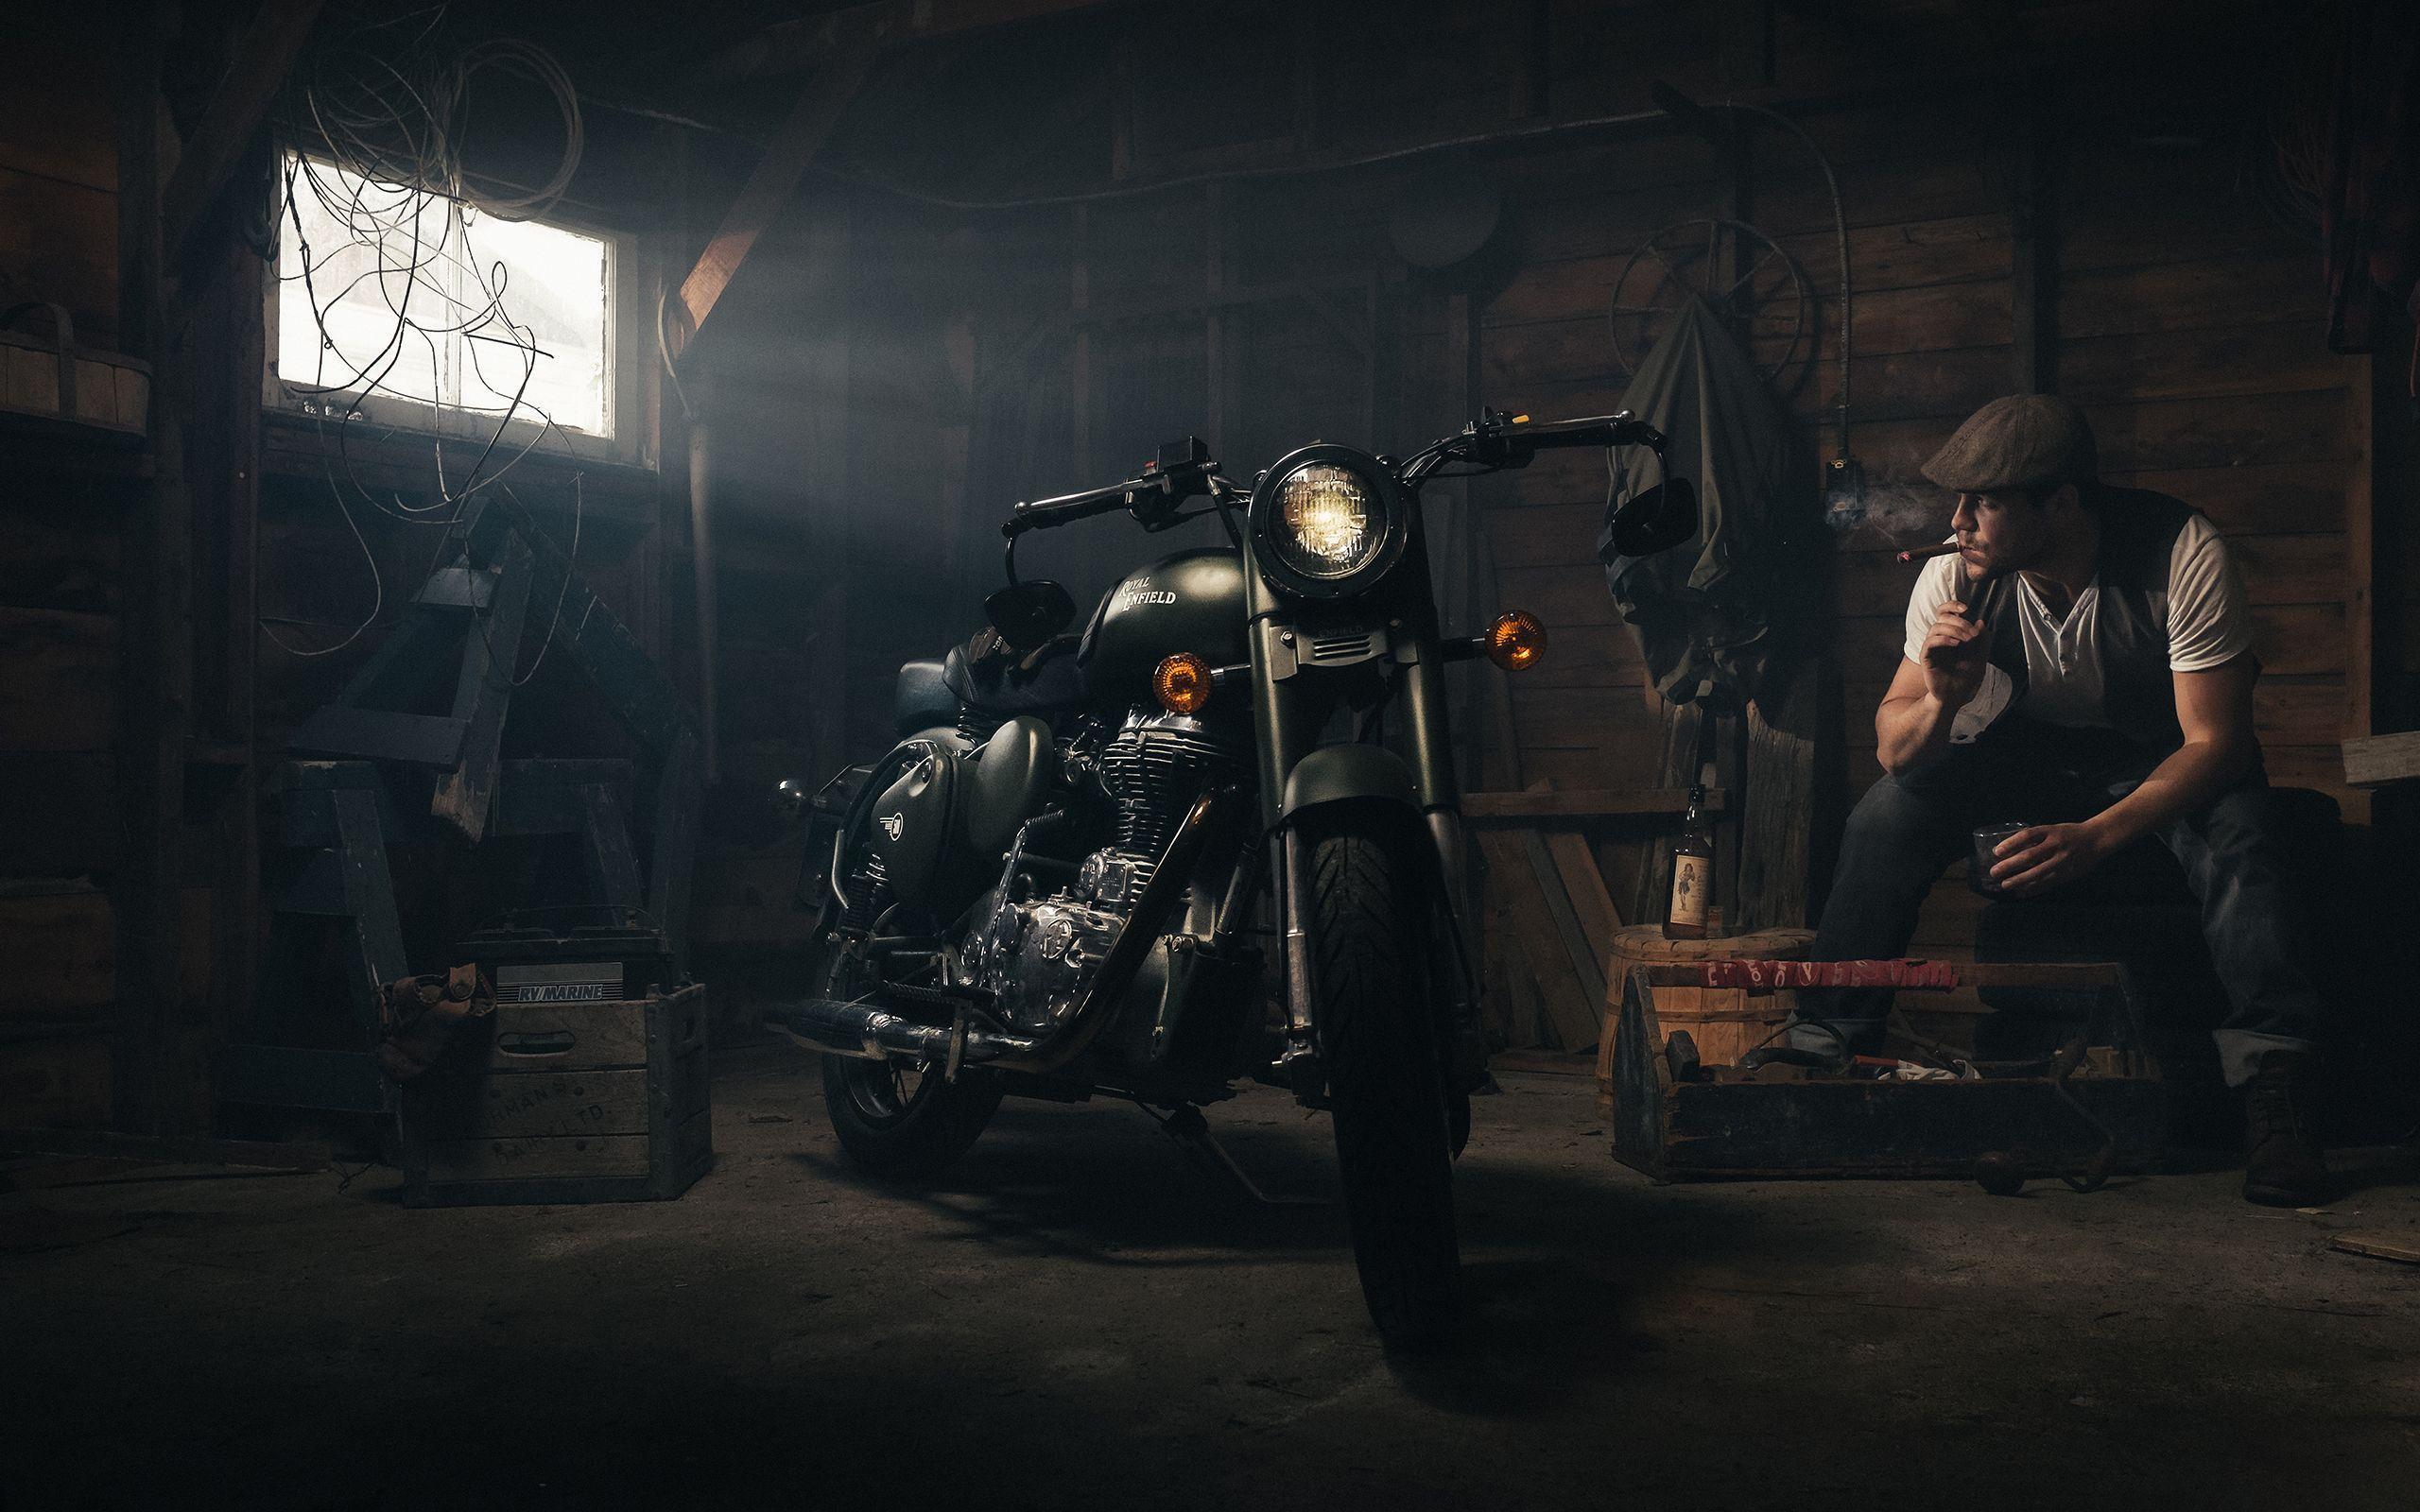 Download wallpaper for 720x1280 resolution. Motorcycle Cigar Shed